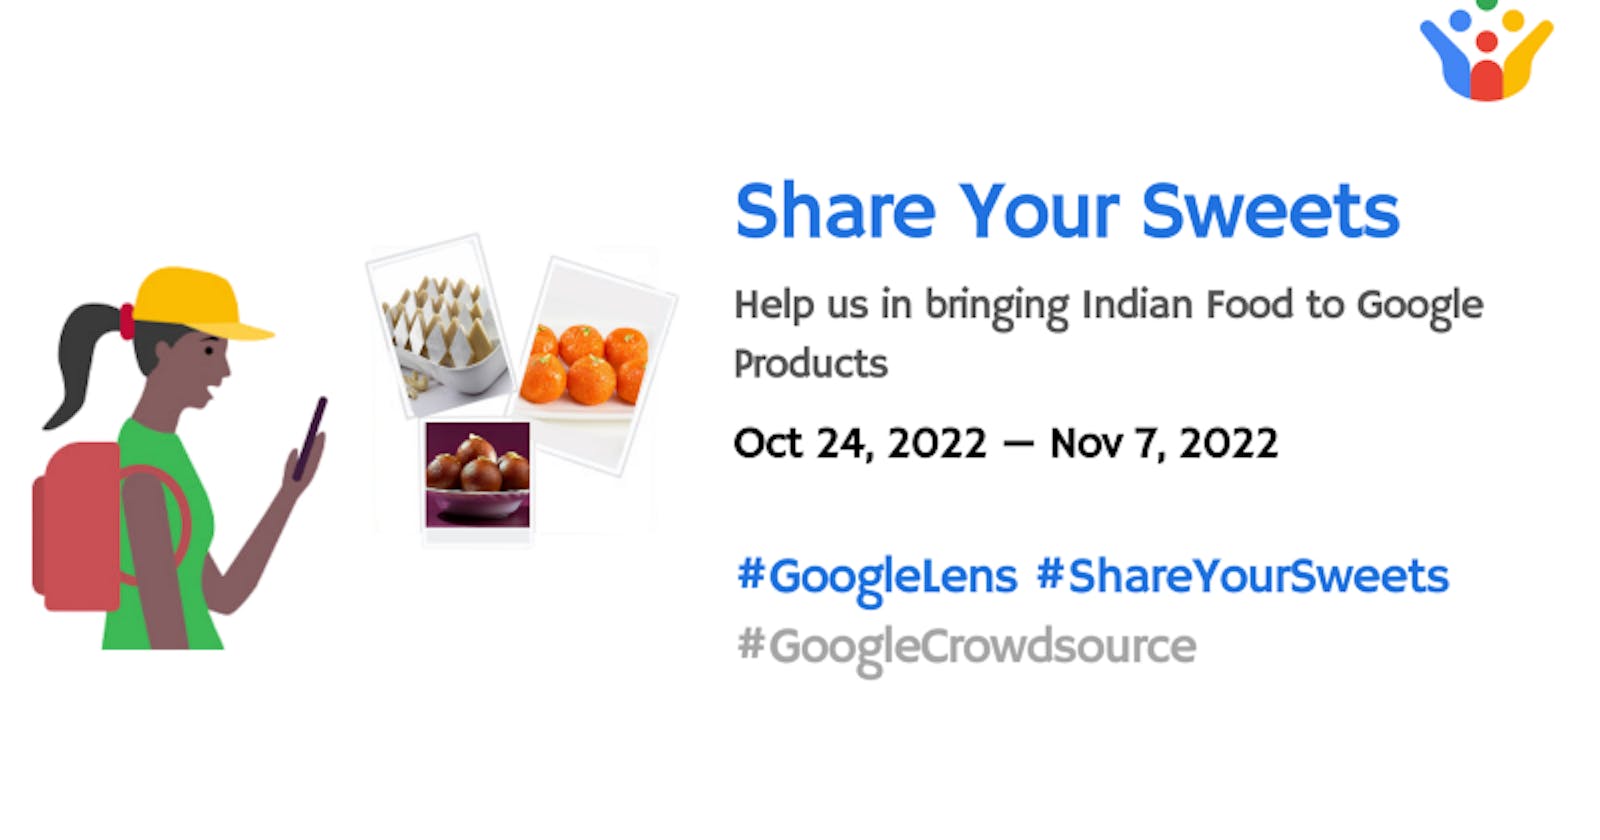 Share Your Sweets by Google Crowdsource